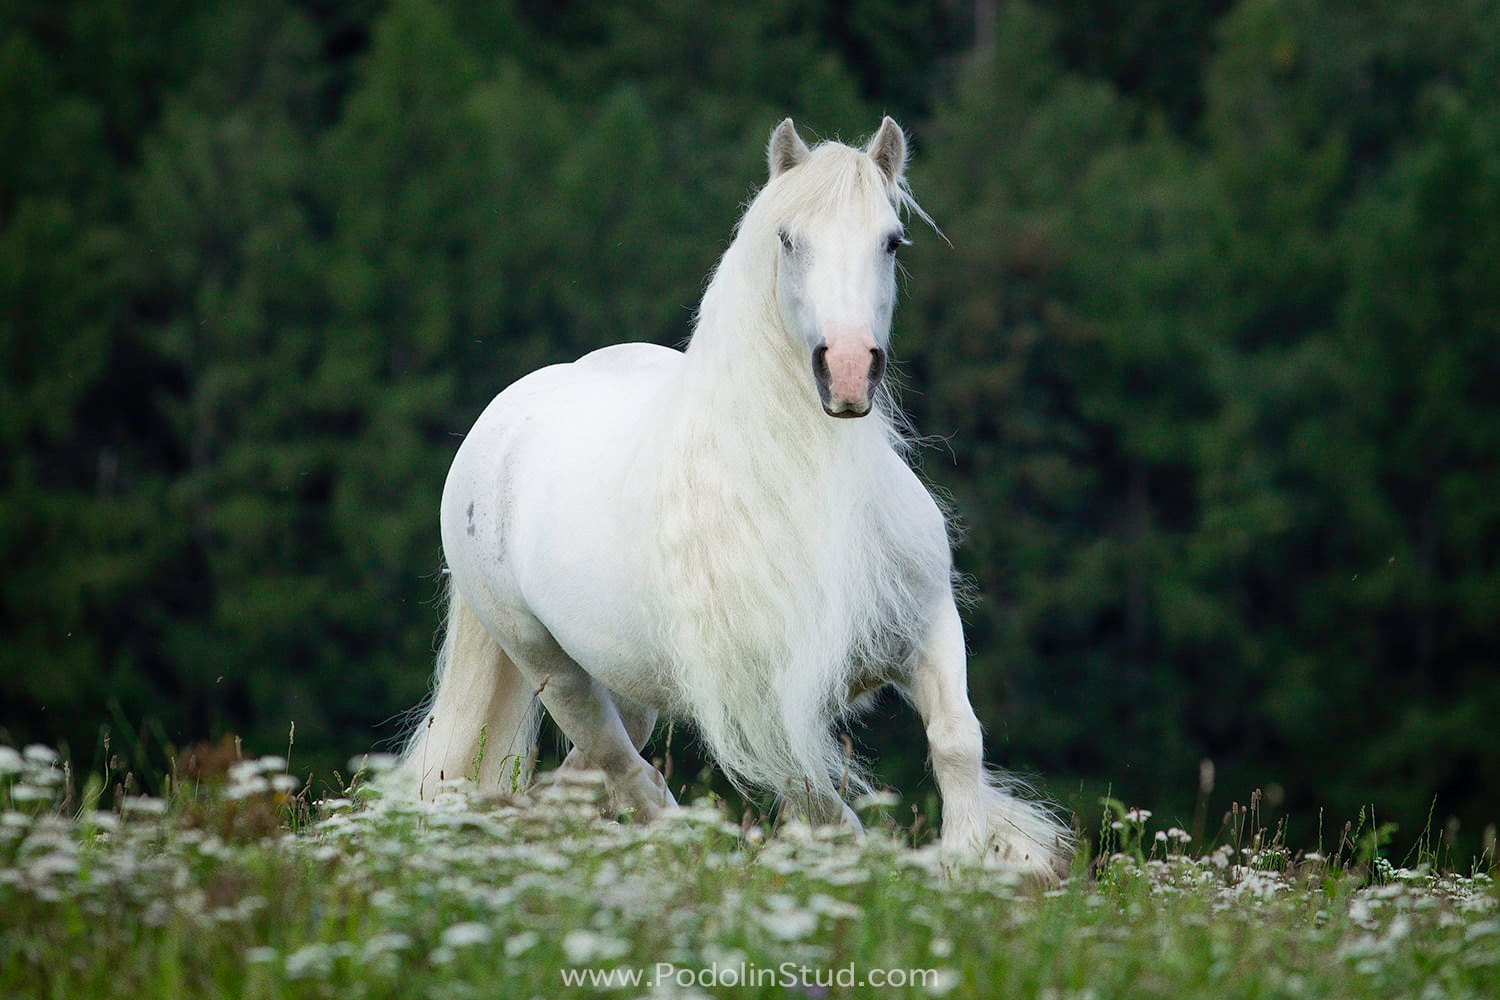 Blue and White Gypsy Cob